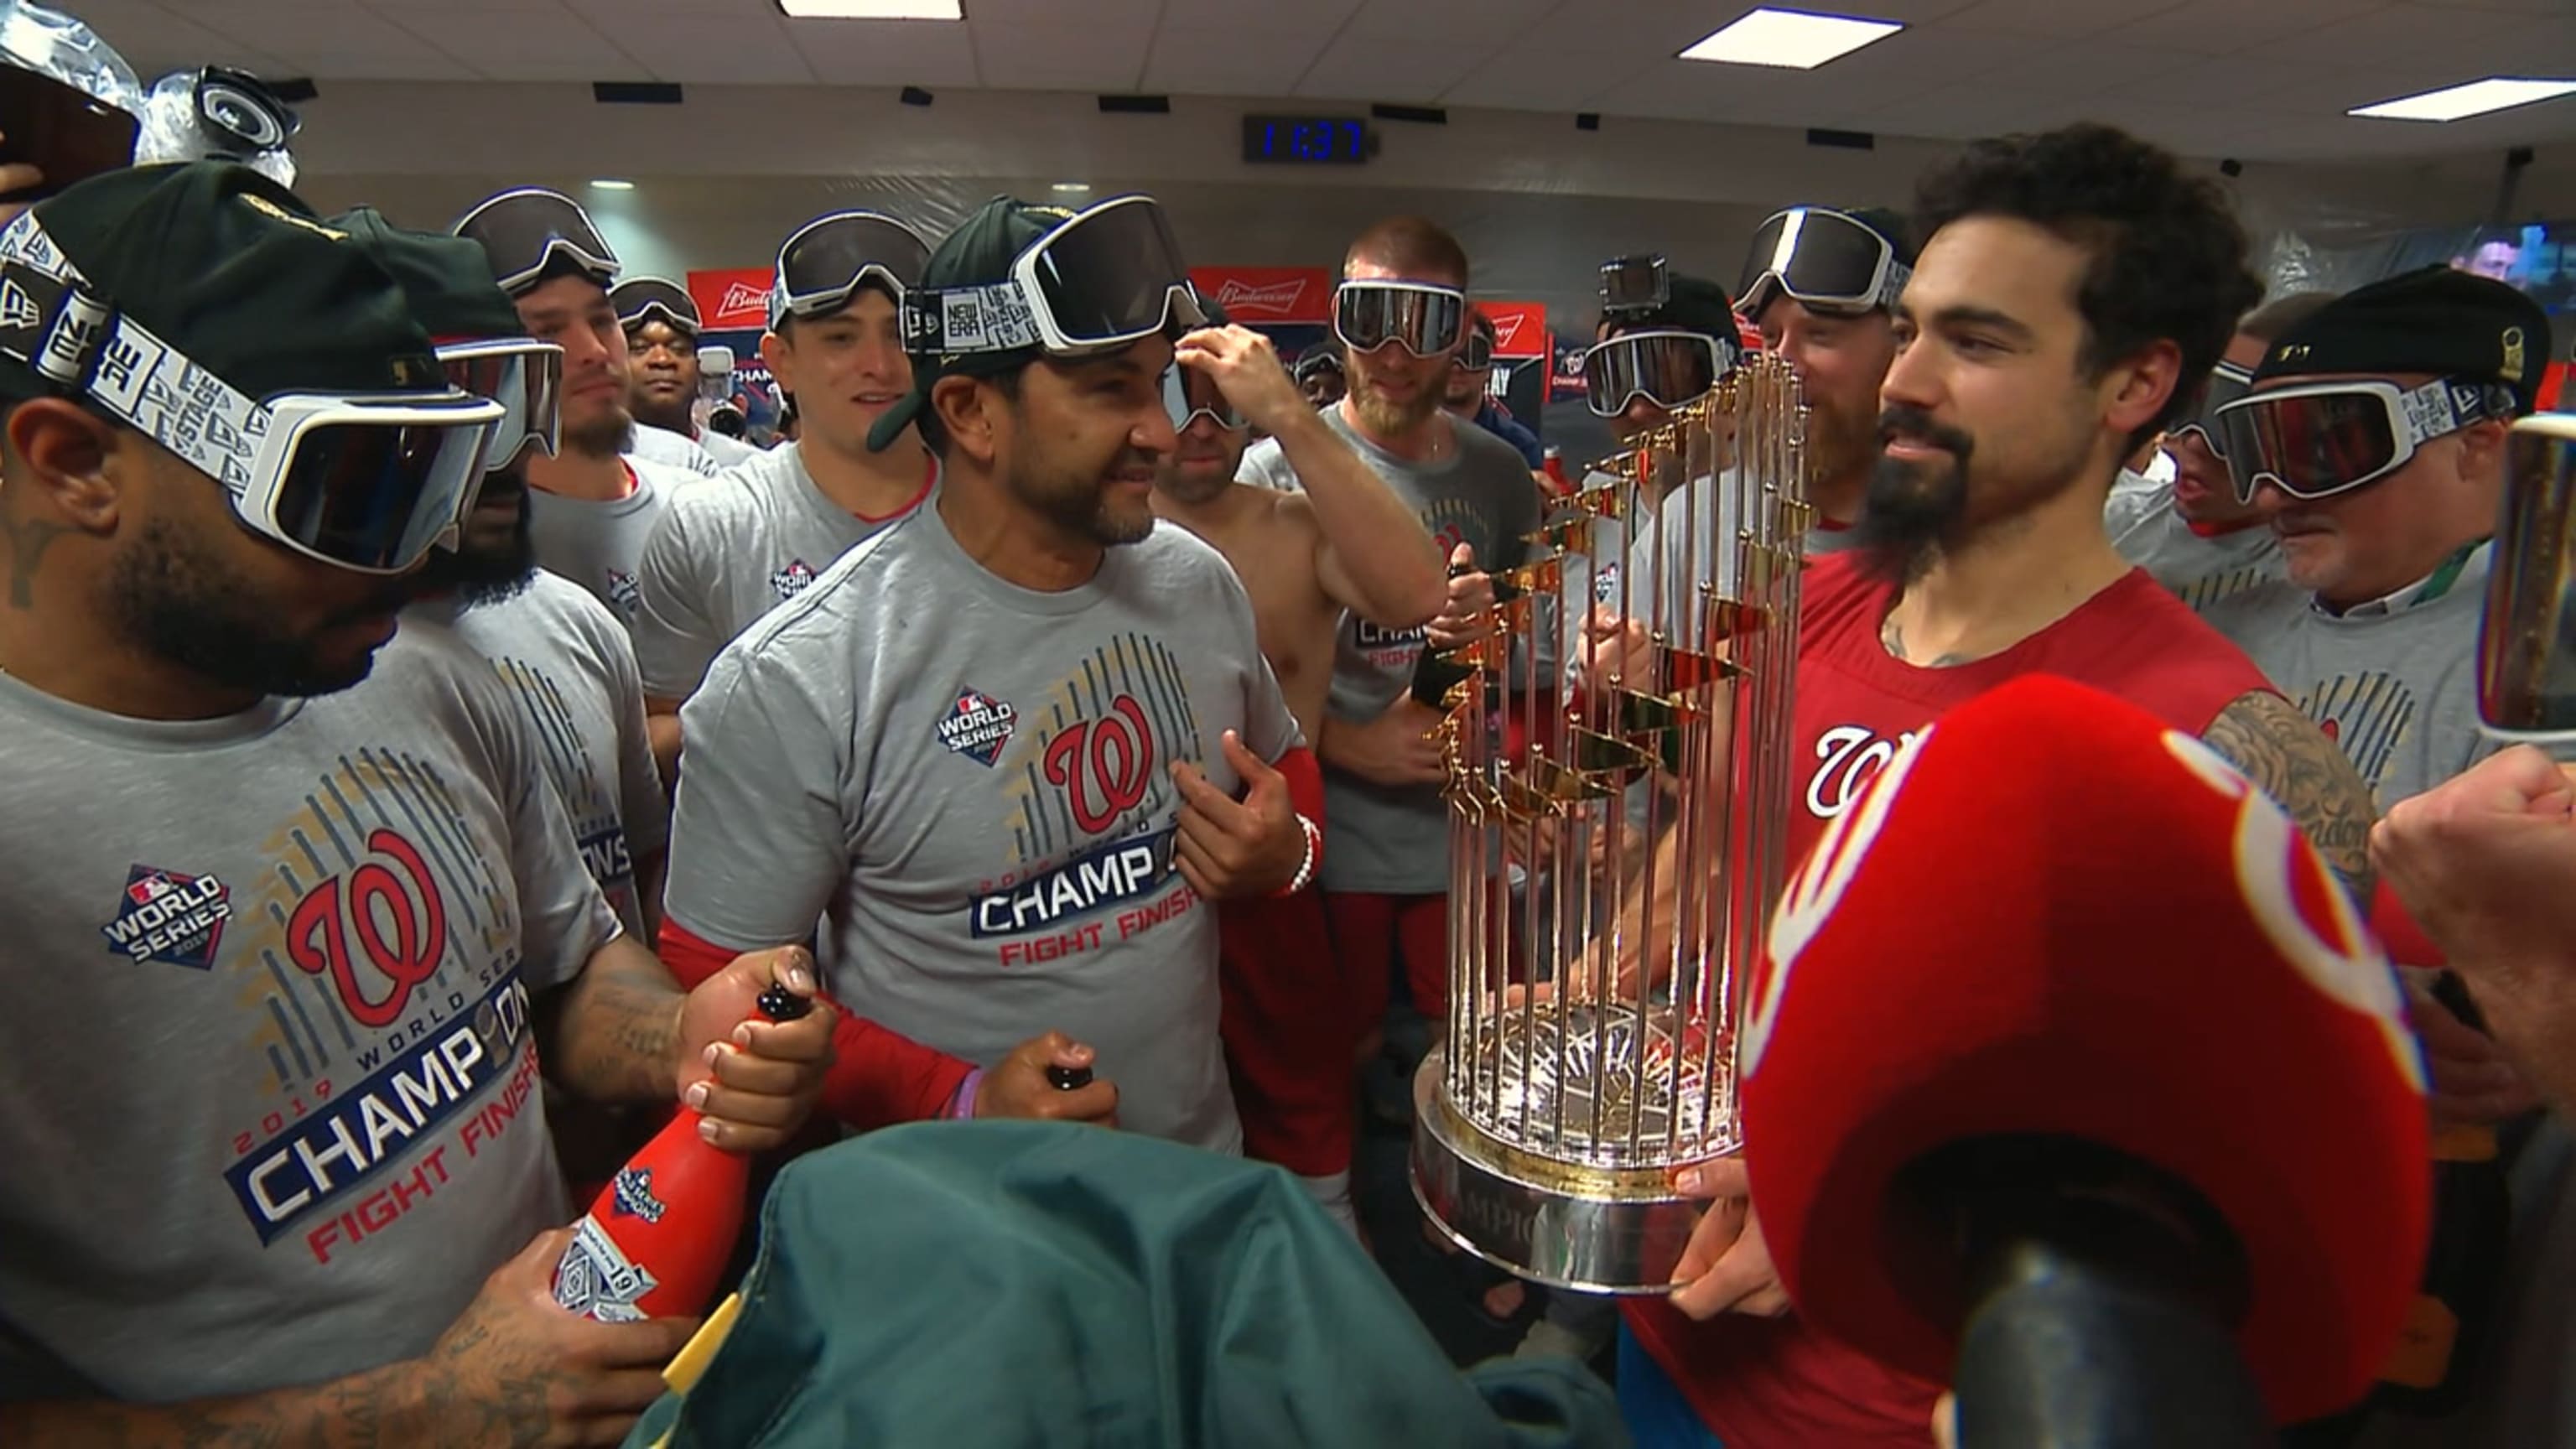 Fight finished: Washington Nationals win their first World Series title